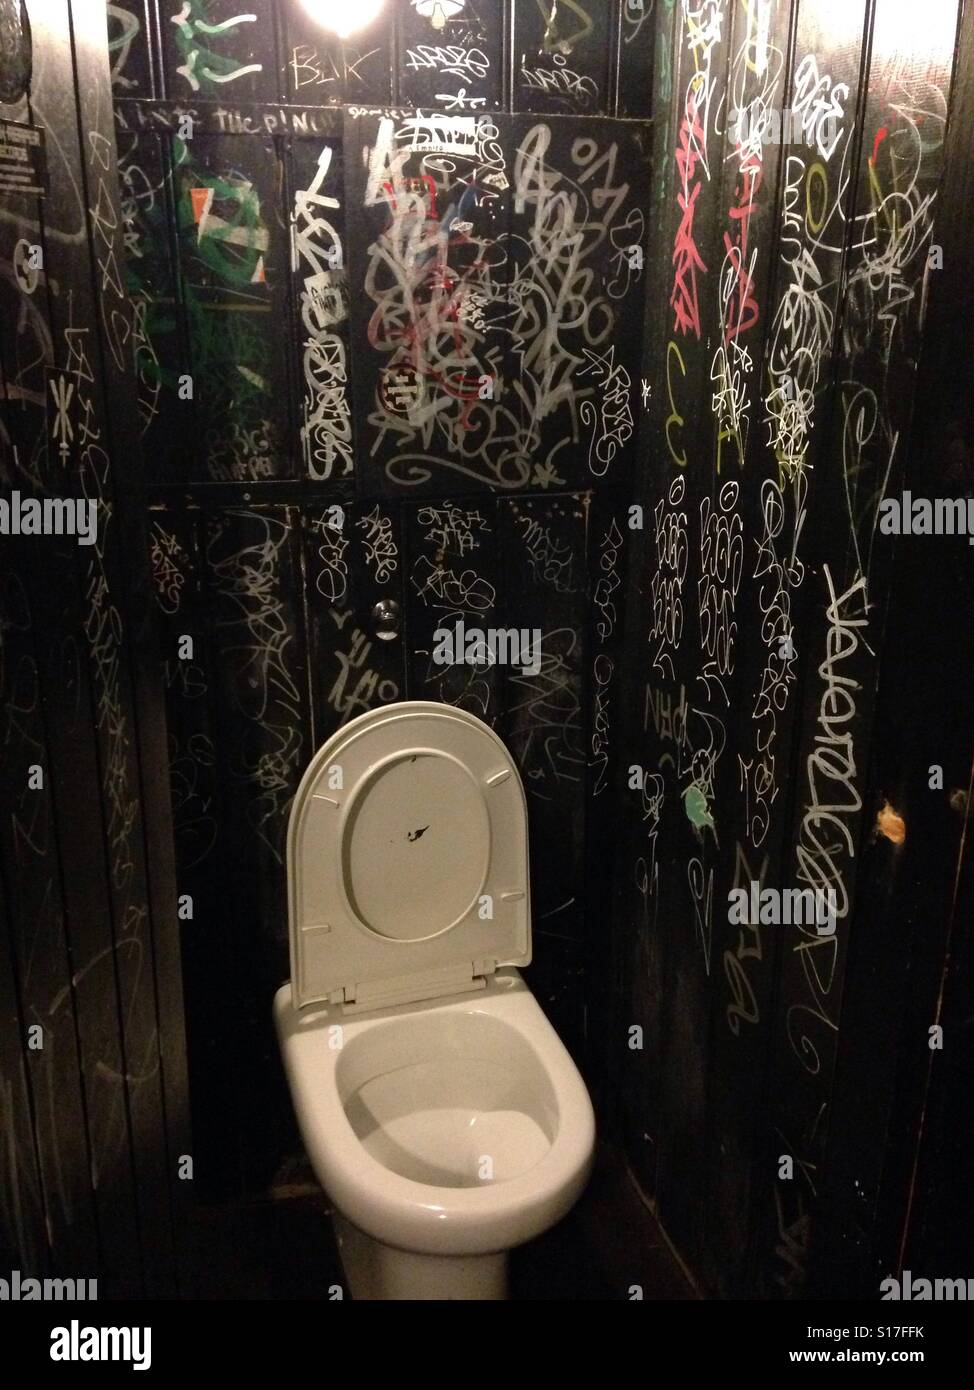 https://c8.alamy.com/comp/S17FFK/graffiti-covered-walls-in-a-dark-and-dingy-mens-room-S17FFK.jpg